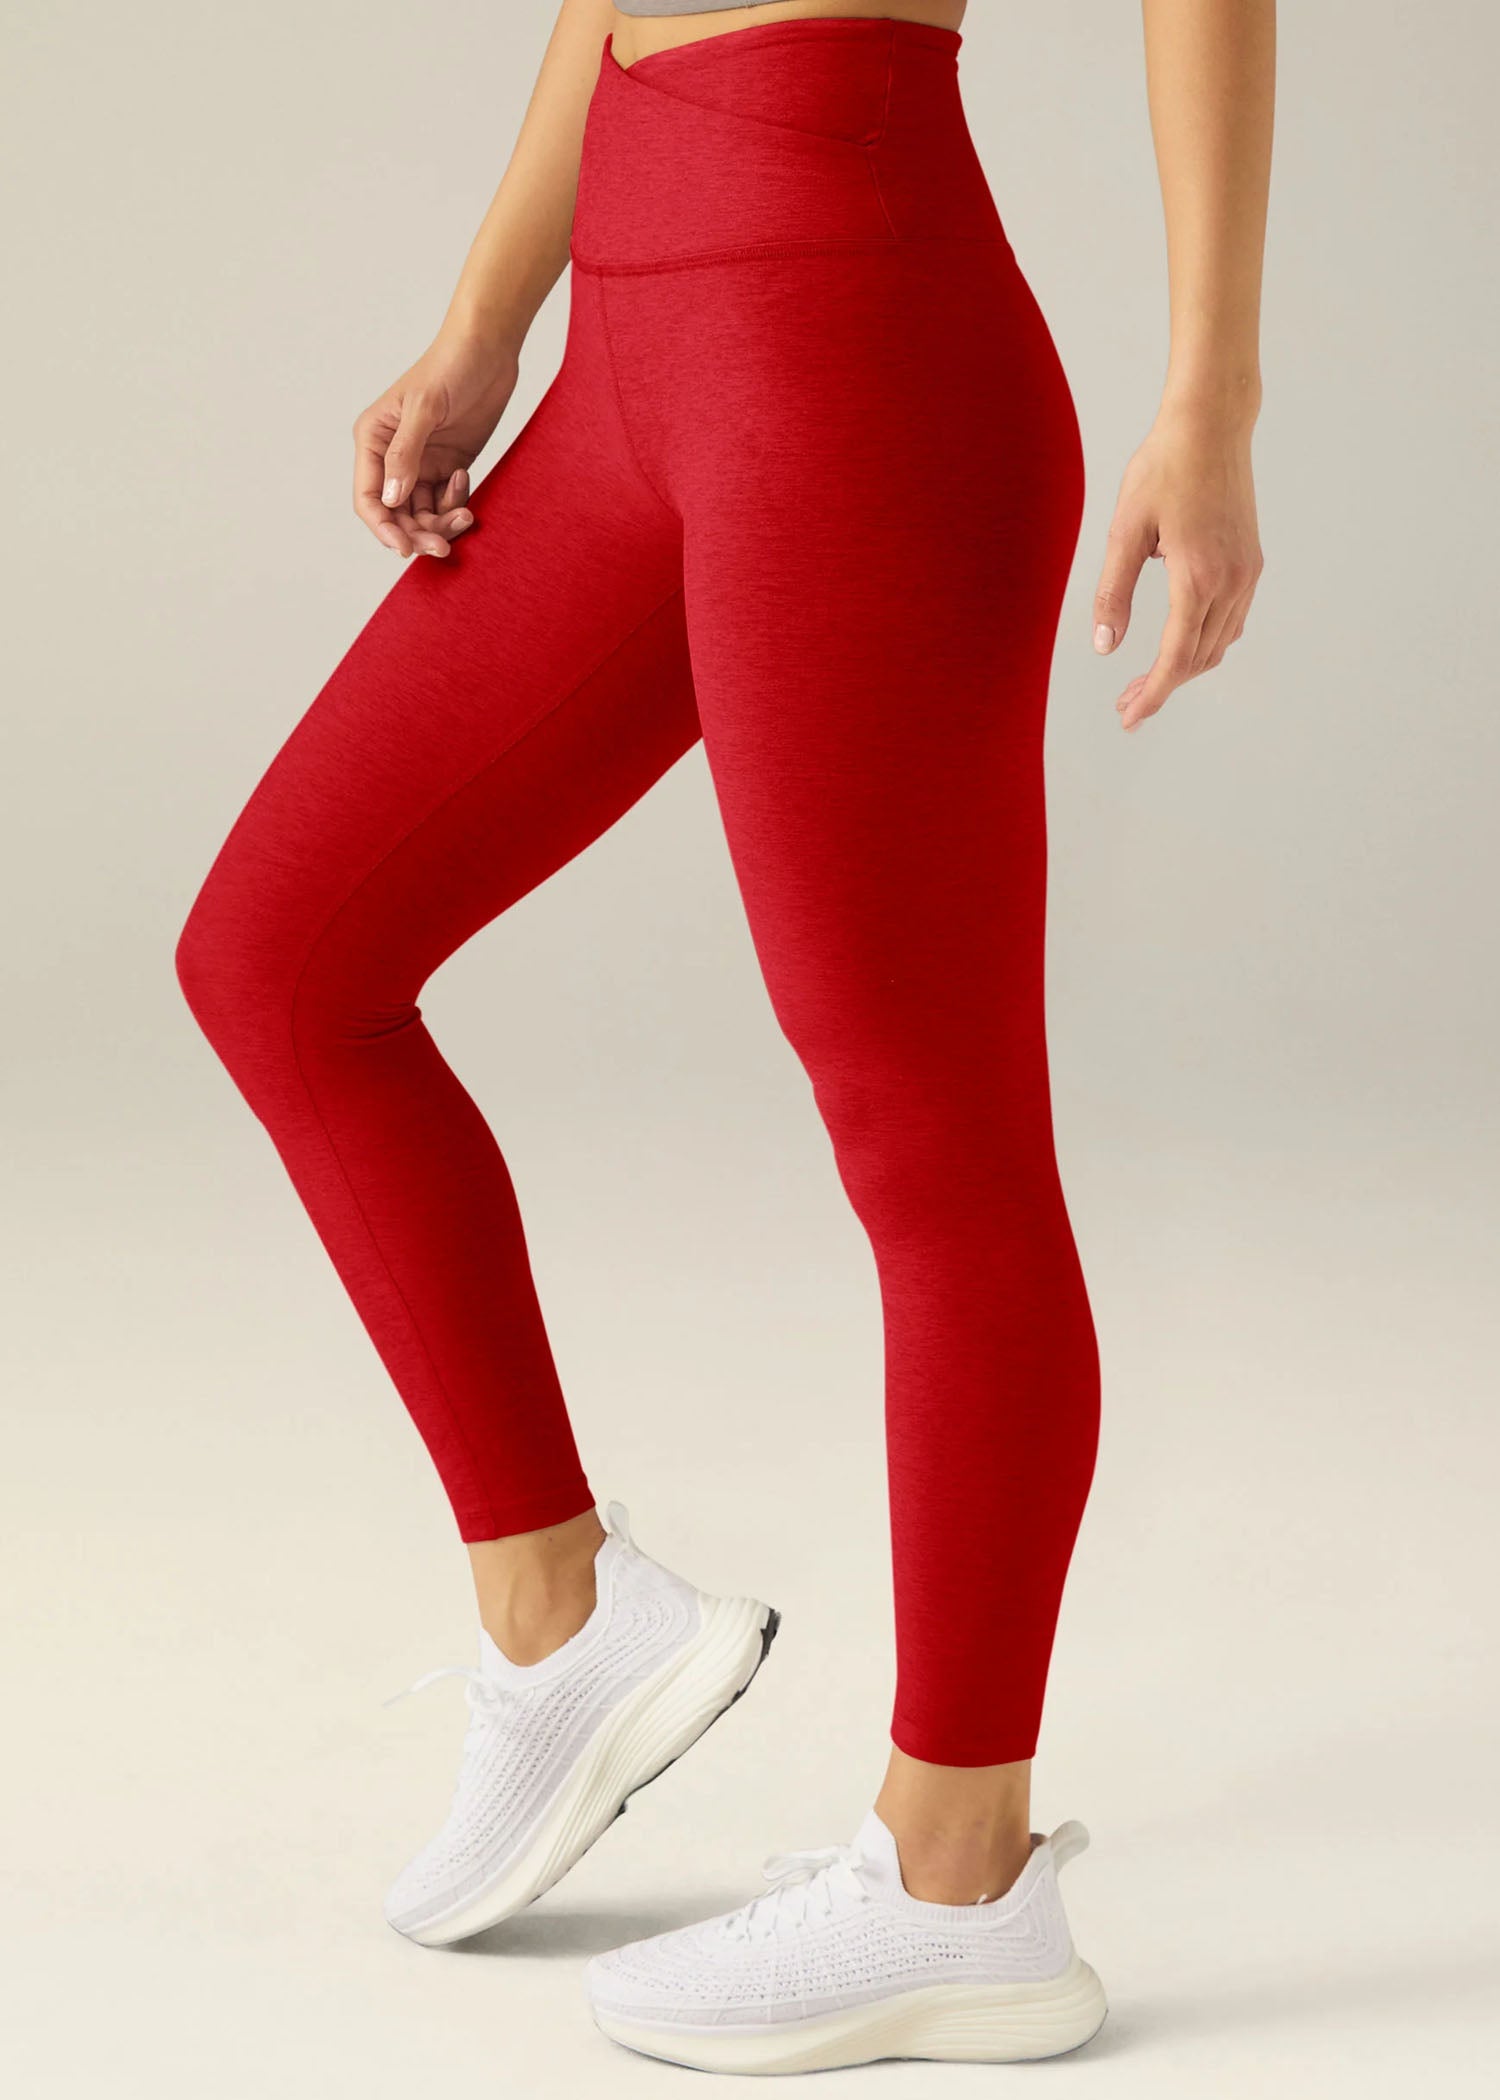 At Your Leisure High-Waisted Midi Legging- Candy Apple Red